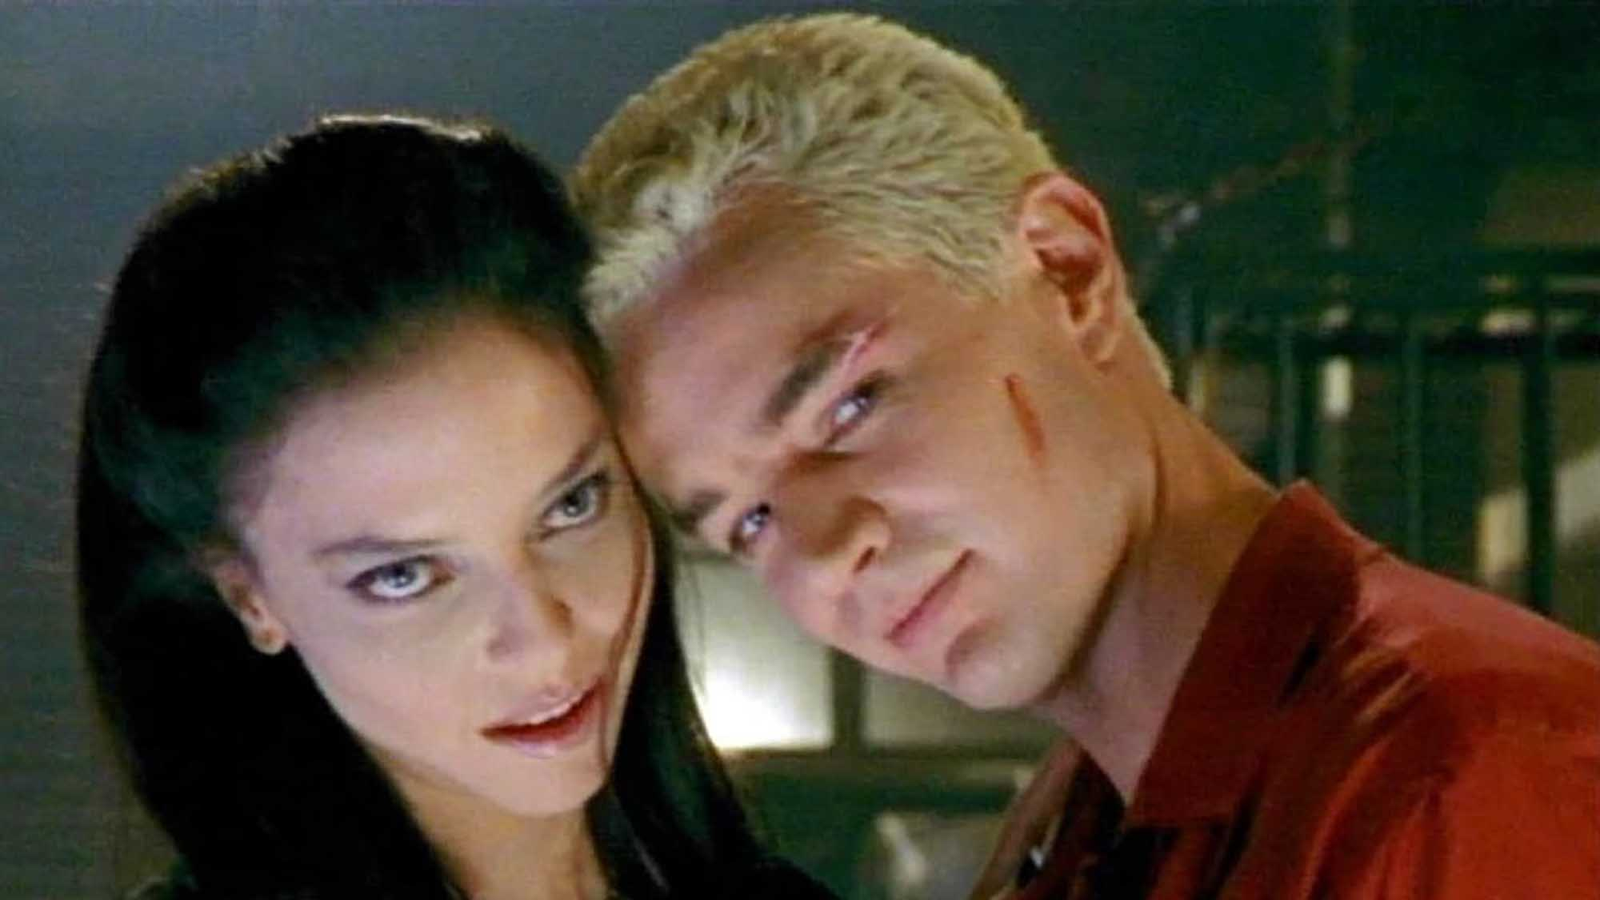 Buffy the Vampire Slayer: Spike and Dru - Not Mint :: Profile